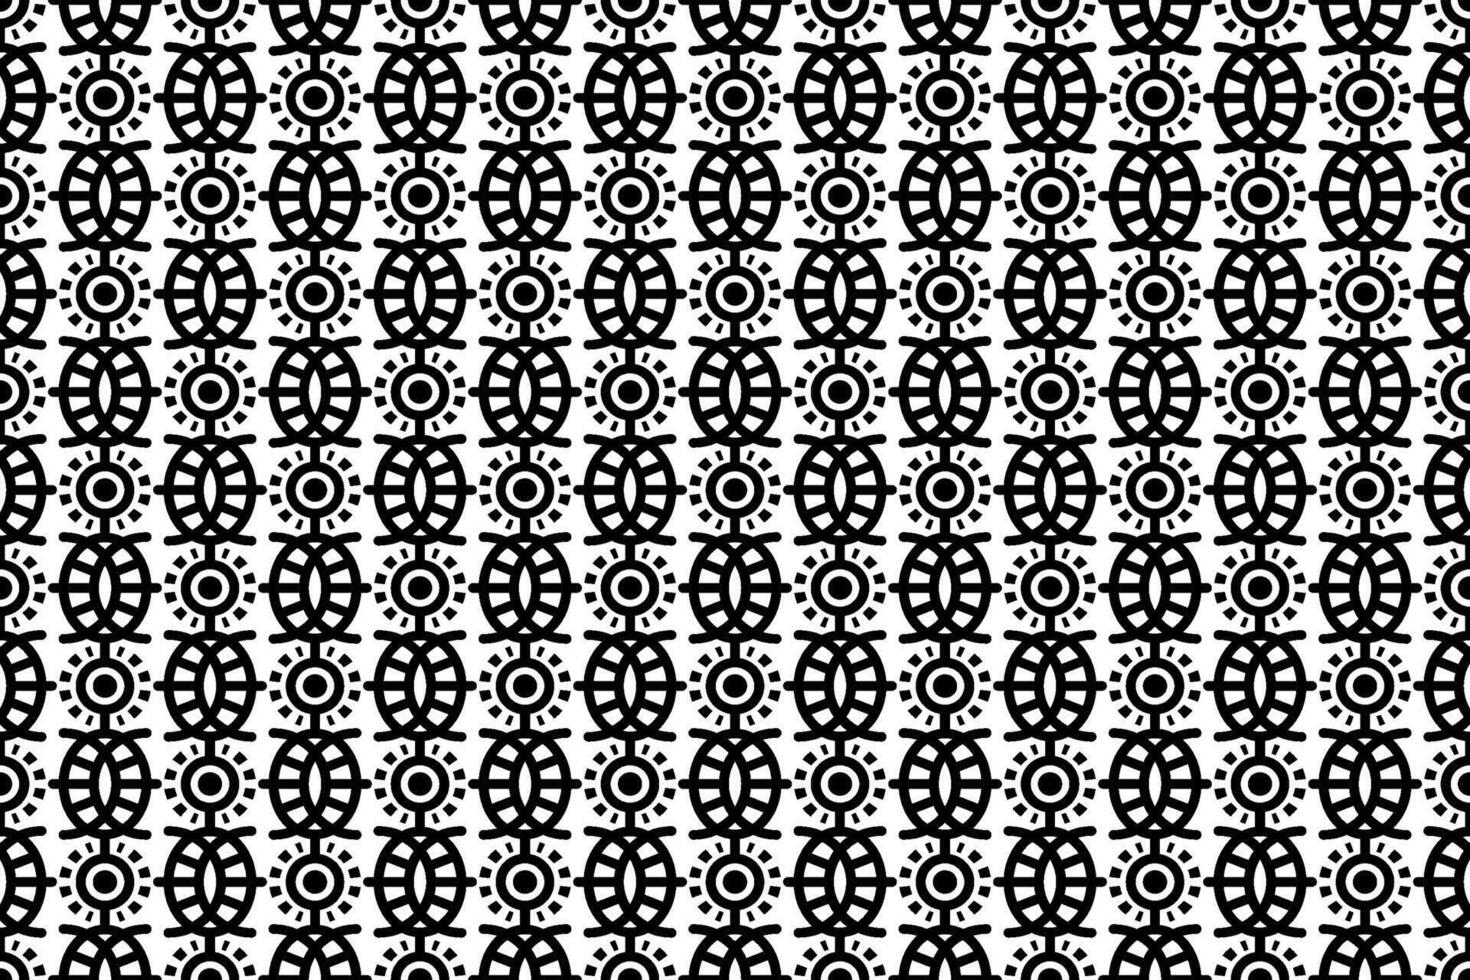 Abstract seamless mosaic pattern with repeating elements. Black and white monochrome textured pattern with geometric elements vector